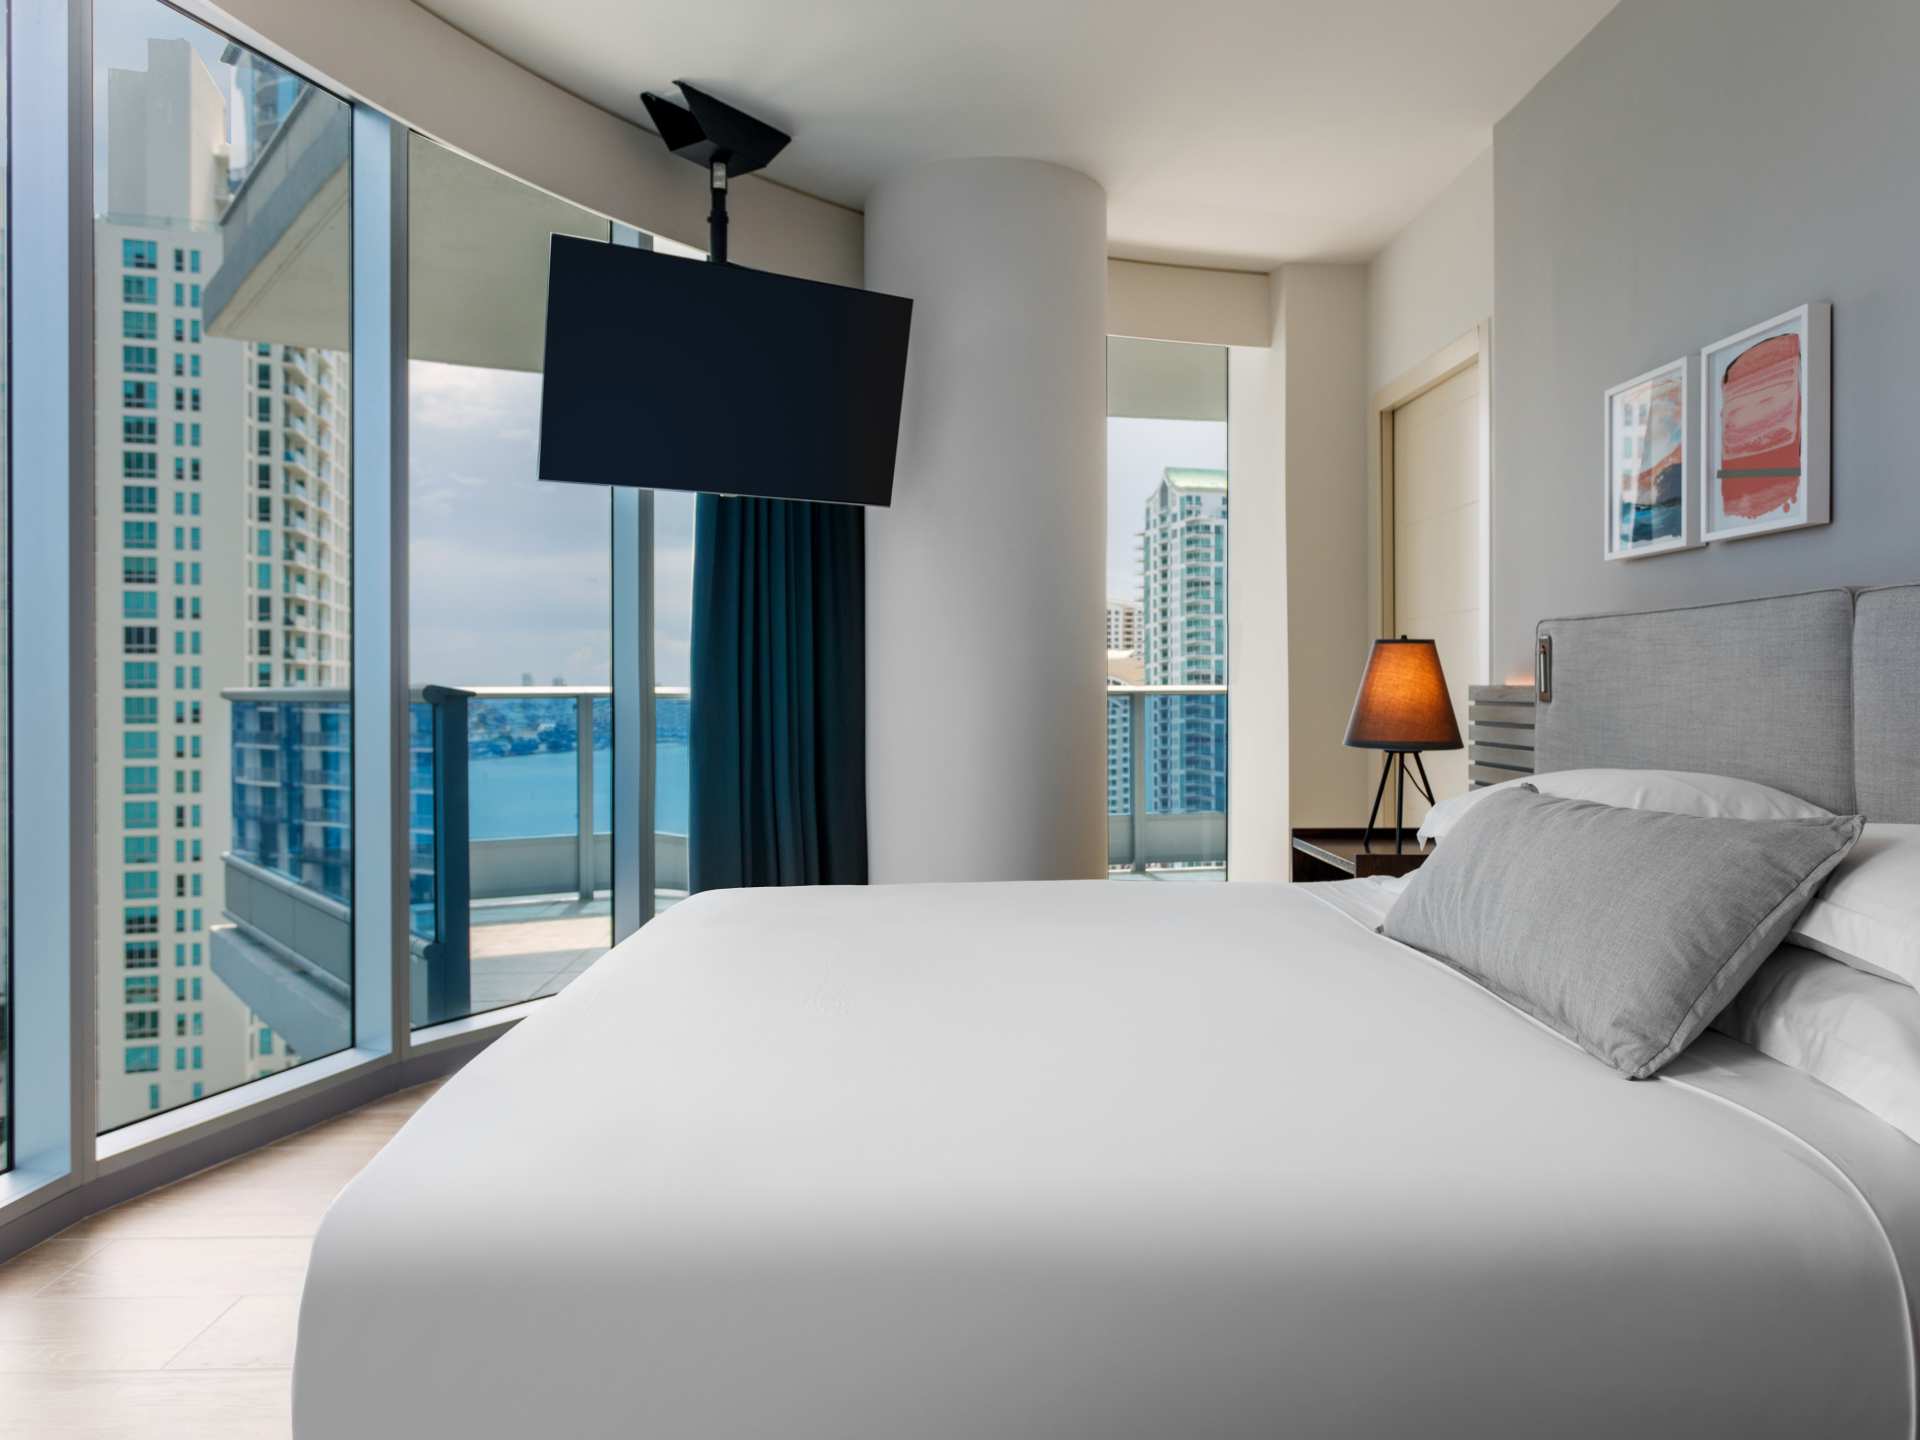 A guest room with a view at the Kimpton EPIC Miami